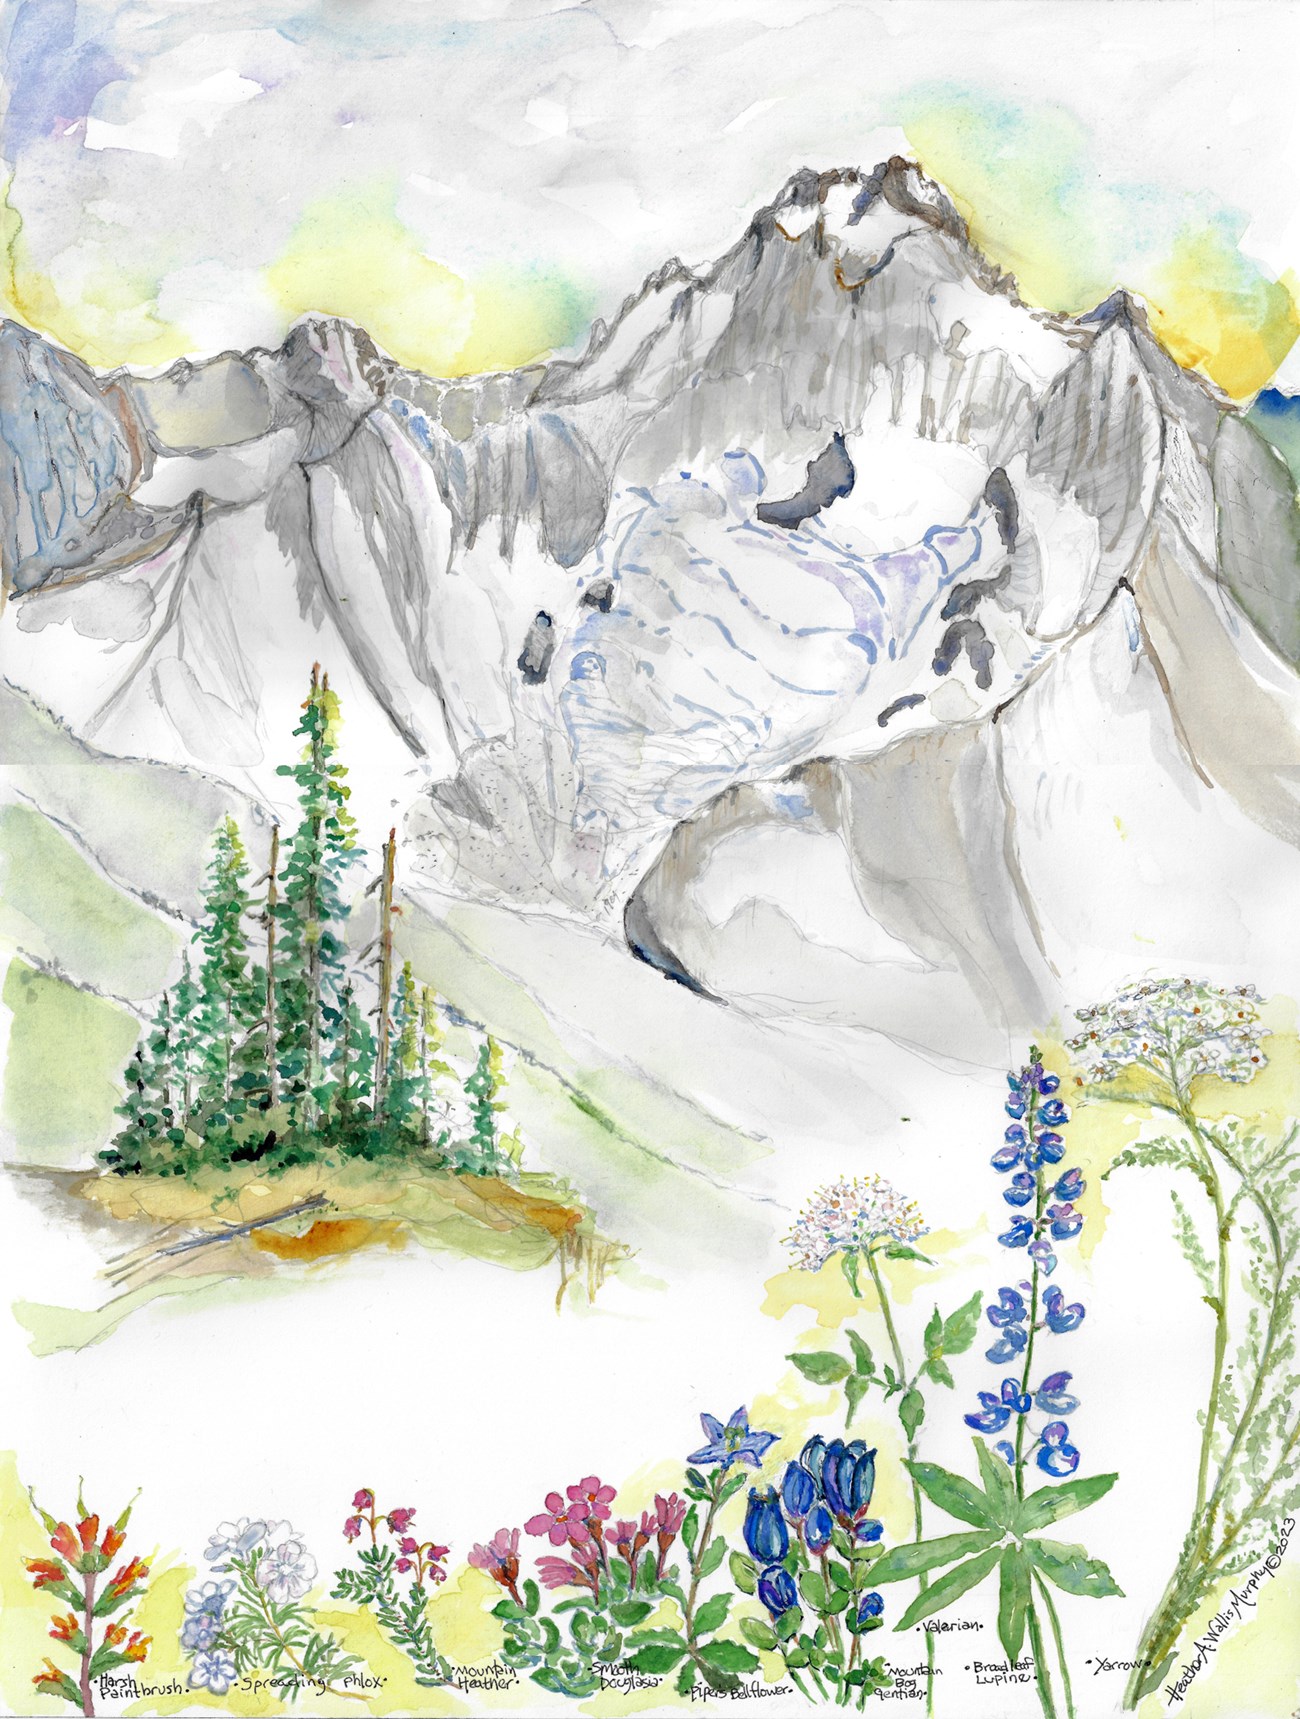 A watercolor mountain with a glacier tucked below its peak. A stand of evergreen trees is clustered below, and in the foreground, a row of different wildflowers.